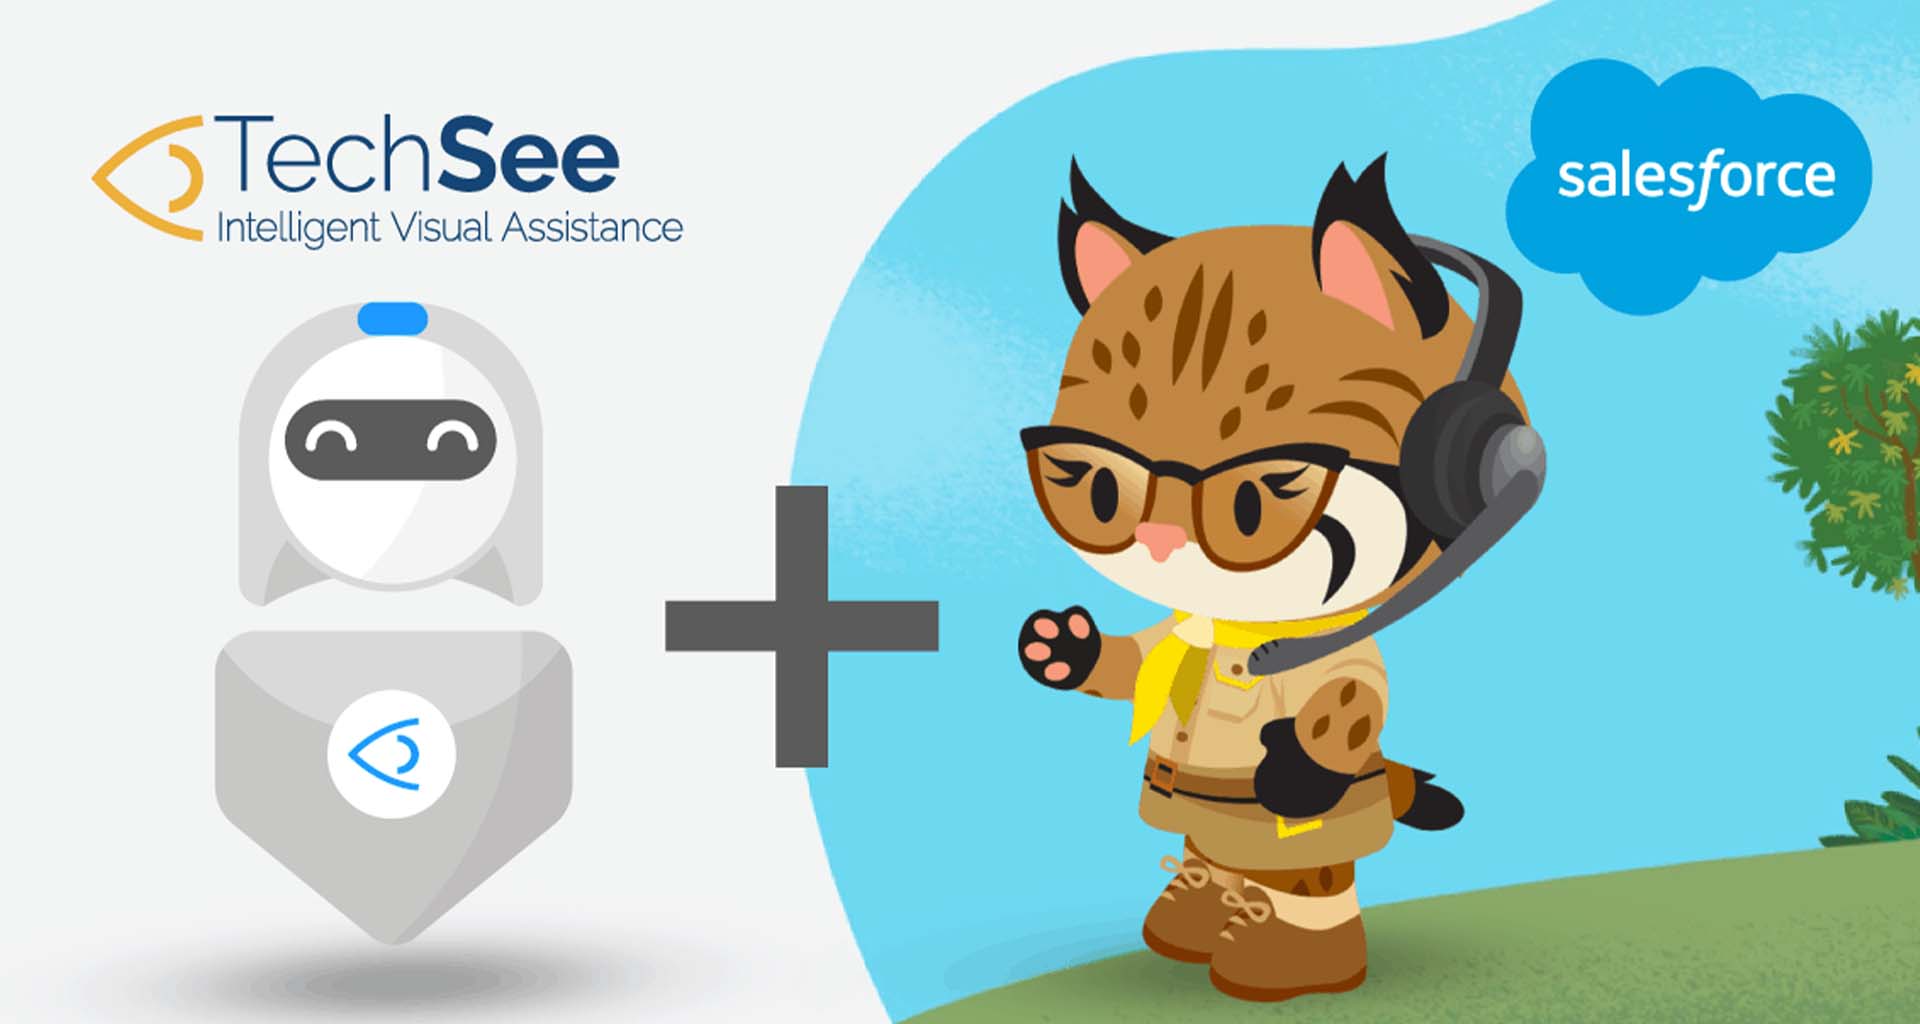 3 Success Stories The Strength of TechSee and Salesforce power ahead to drive digital